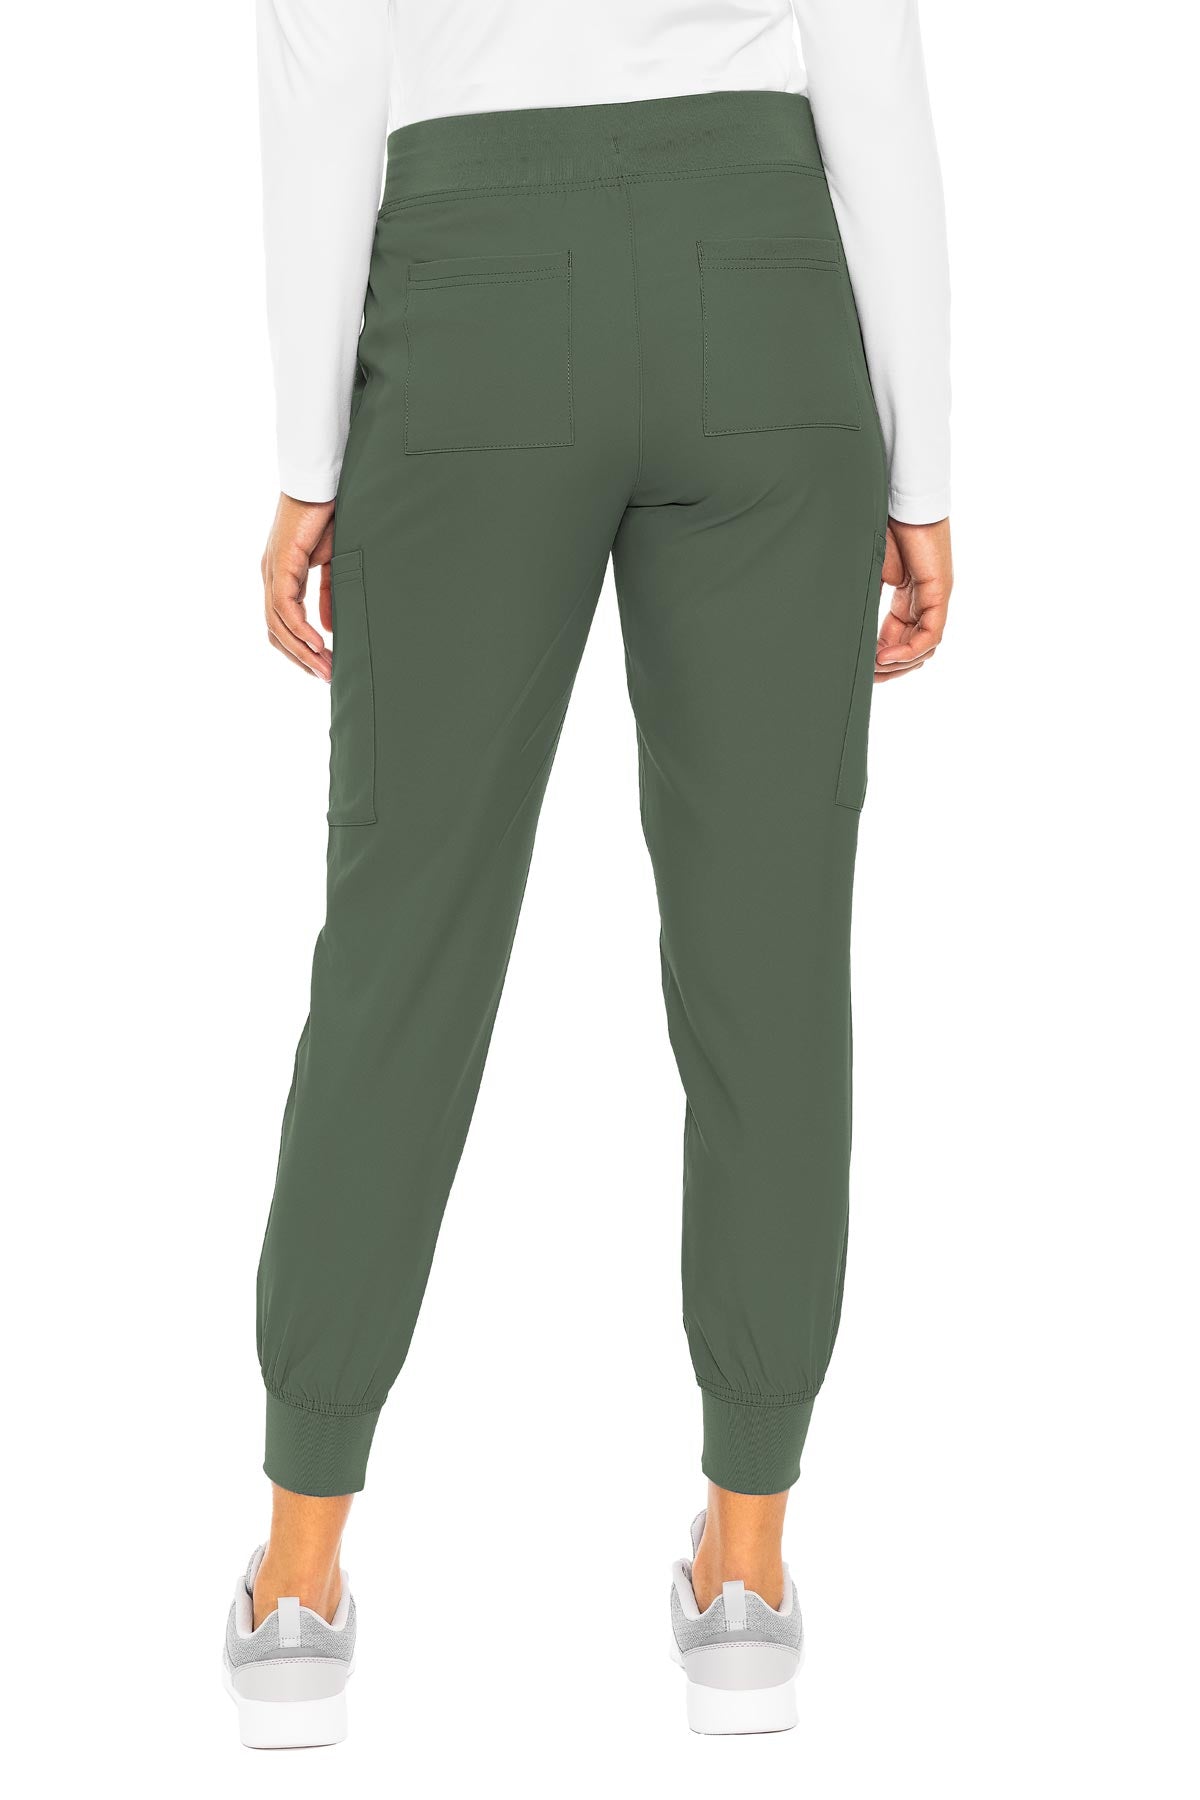 Med Couture 2711 Insight Jogger Pant Olive Green Back